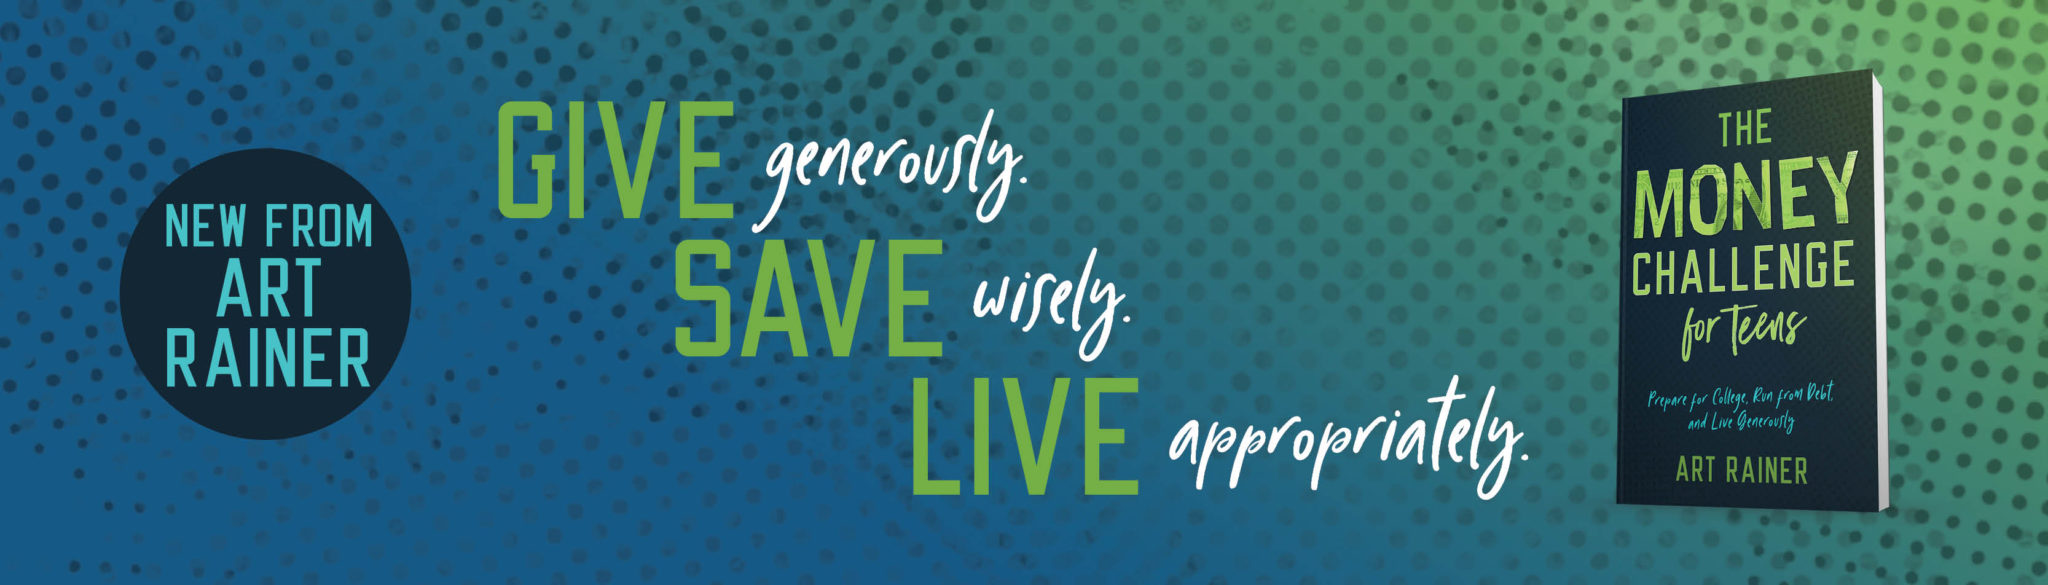 Give Generously. Save Wisely. Live Appropriately. New from Art Rainer